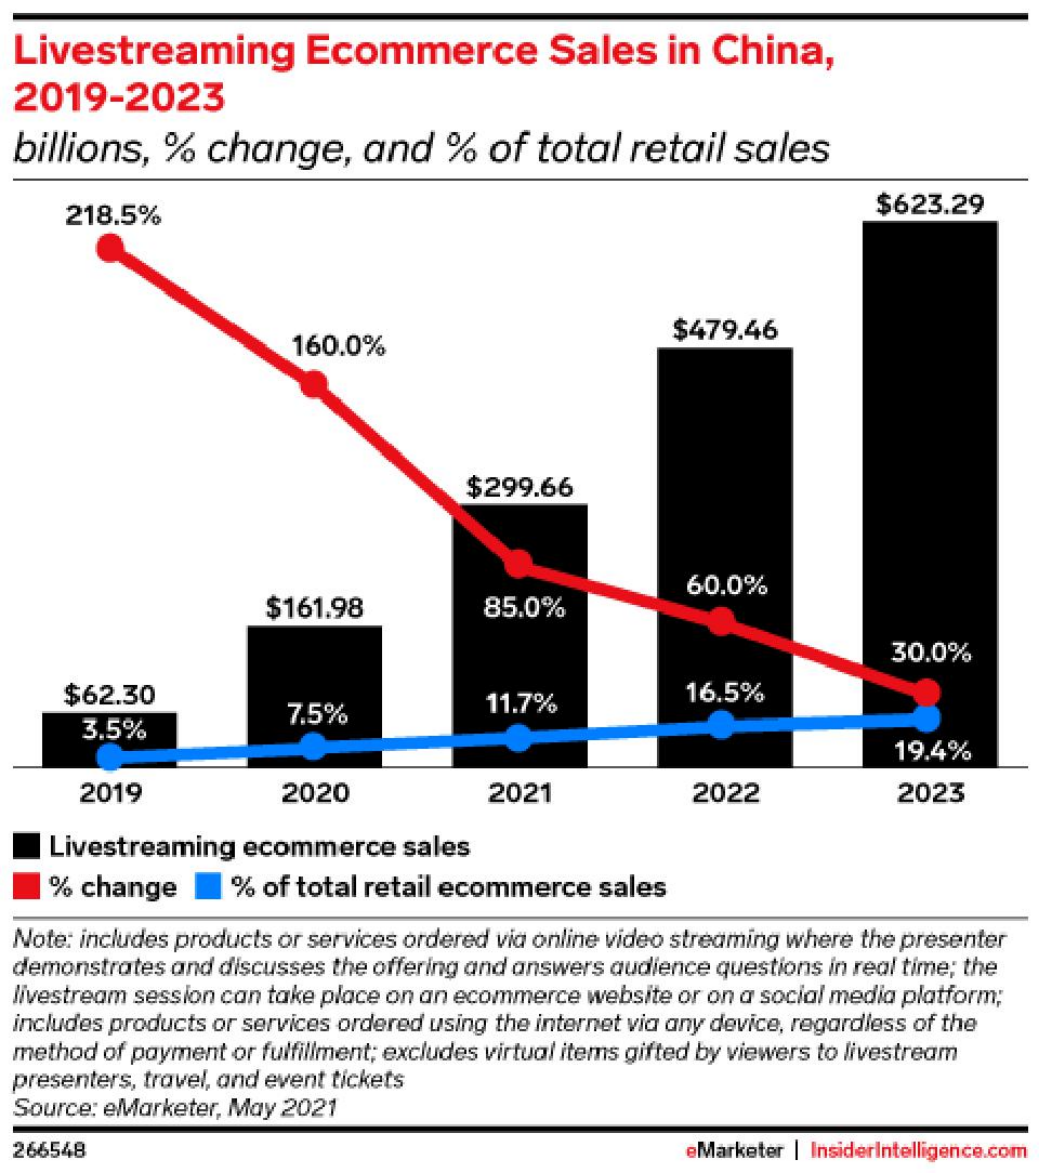 With the participation of cross-border e-commerce companies Amazon, Google, Facebook and Tiktok, the scale of live shopping will reach 500 billion dollars in 2022?